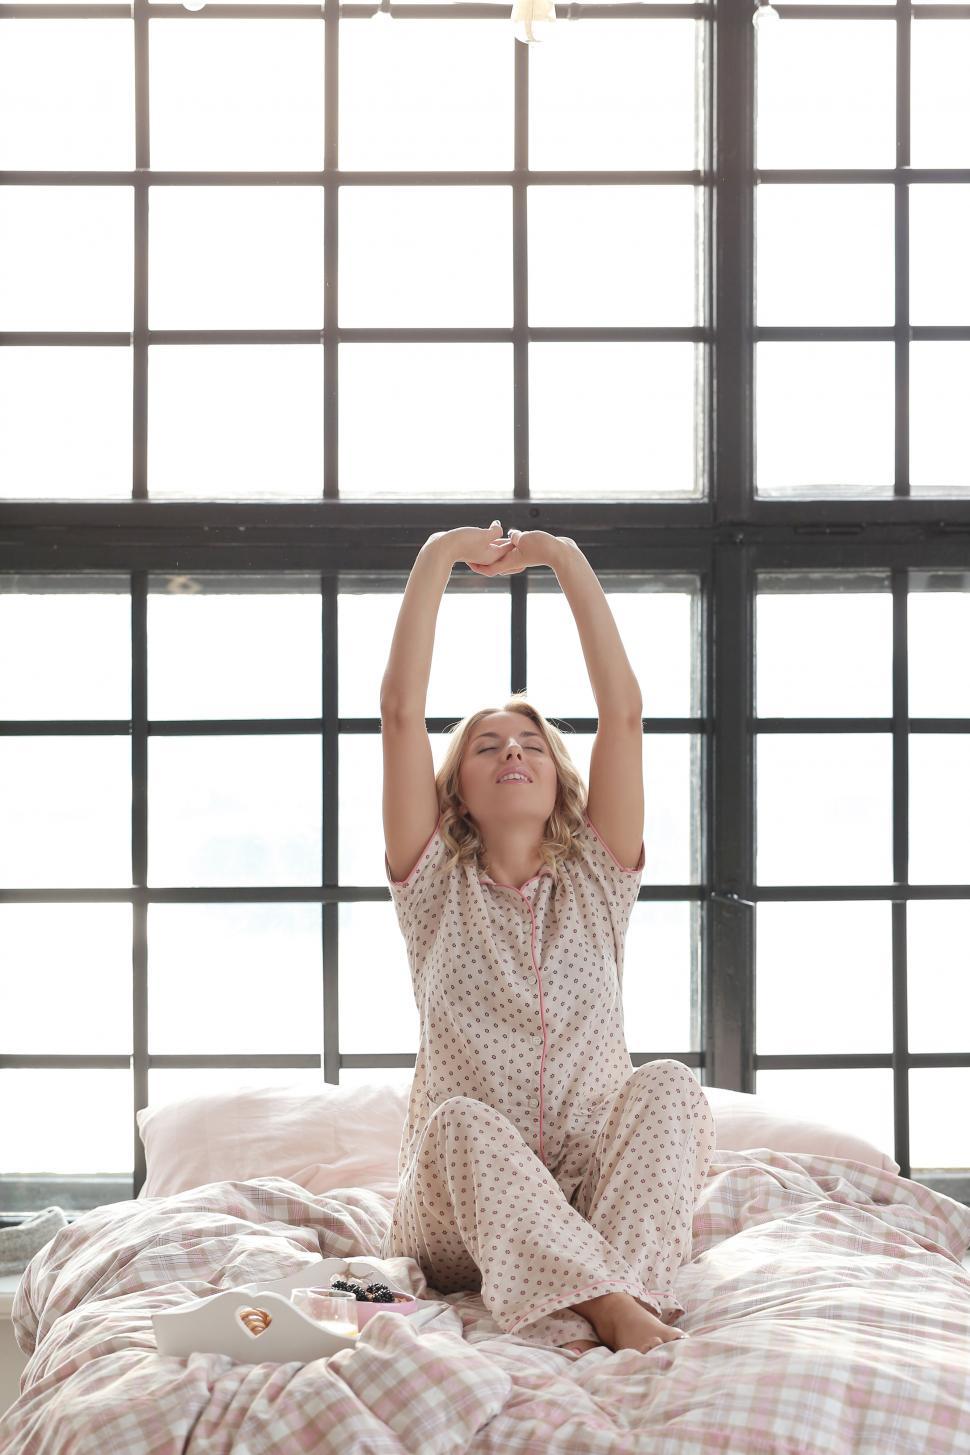 Free Image of Woman stretching in bed 